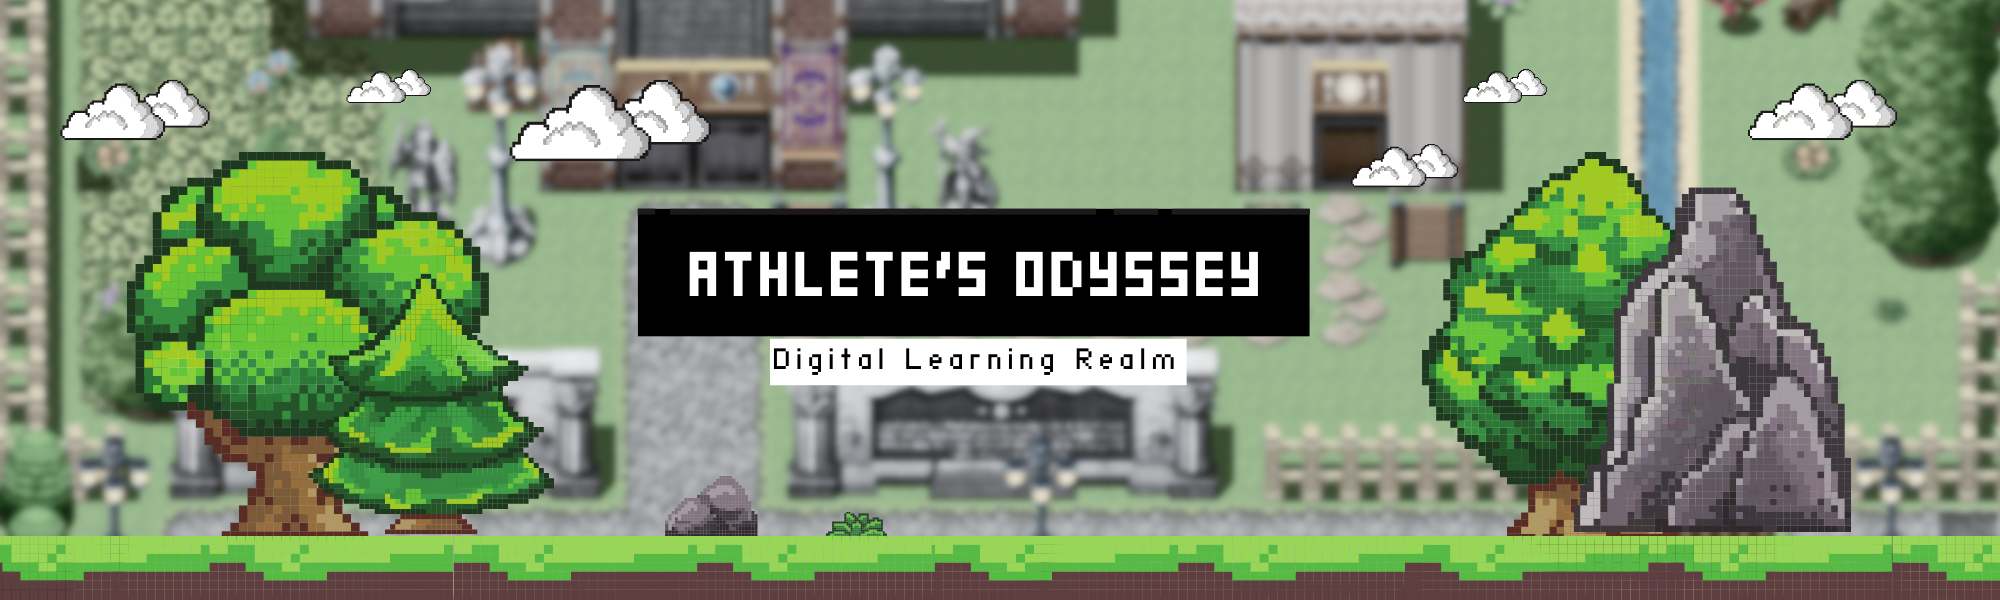 Athlete's Odyssey: Digital Learning Realm